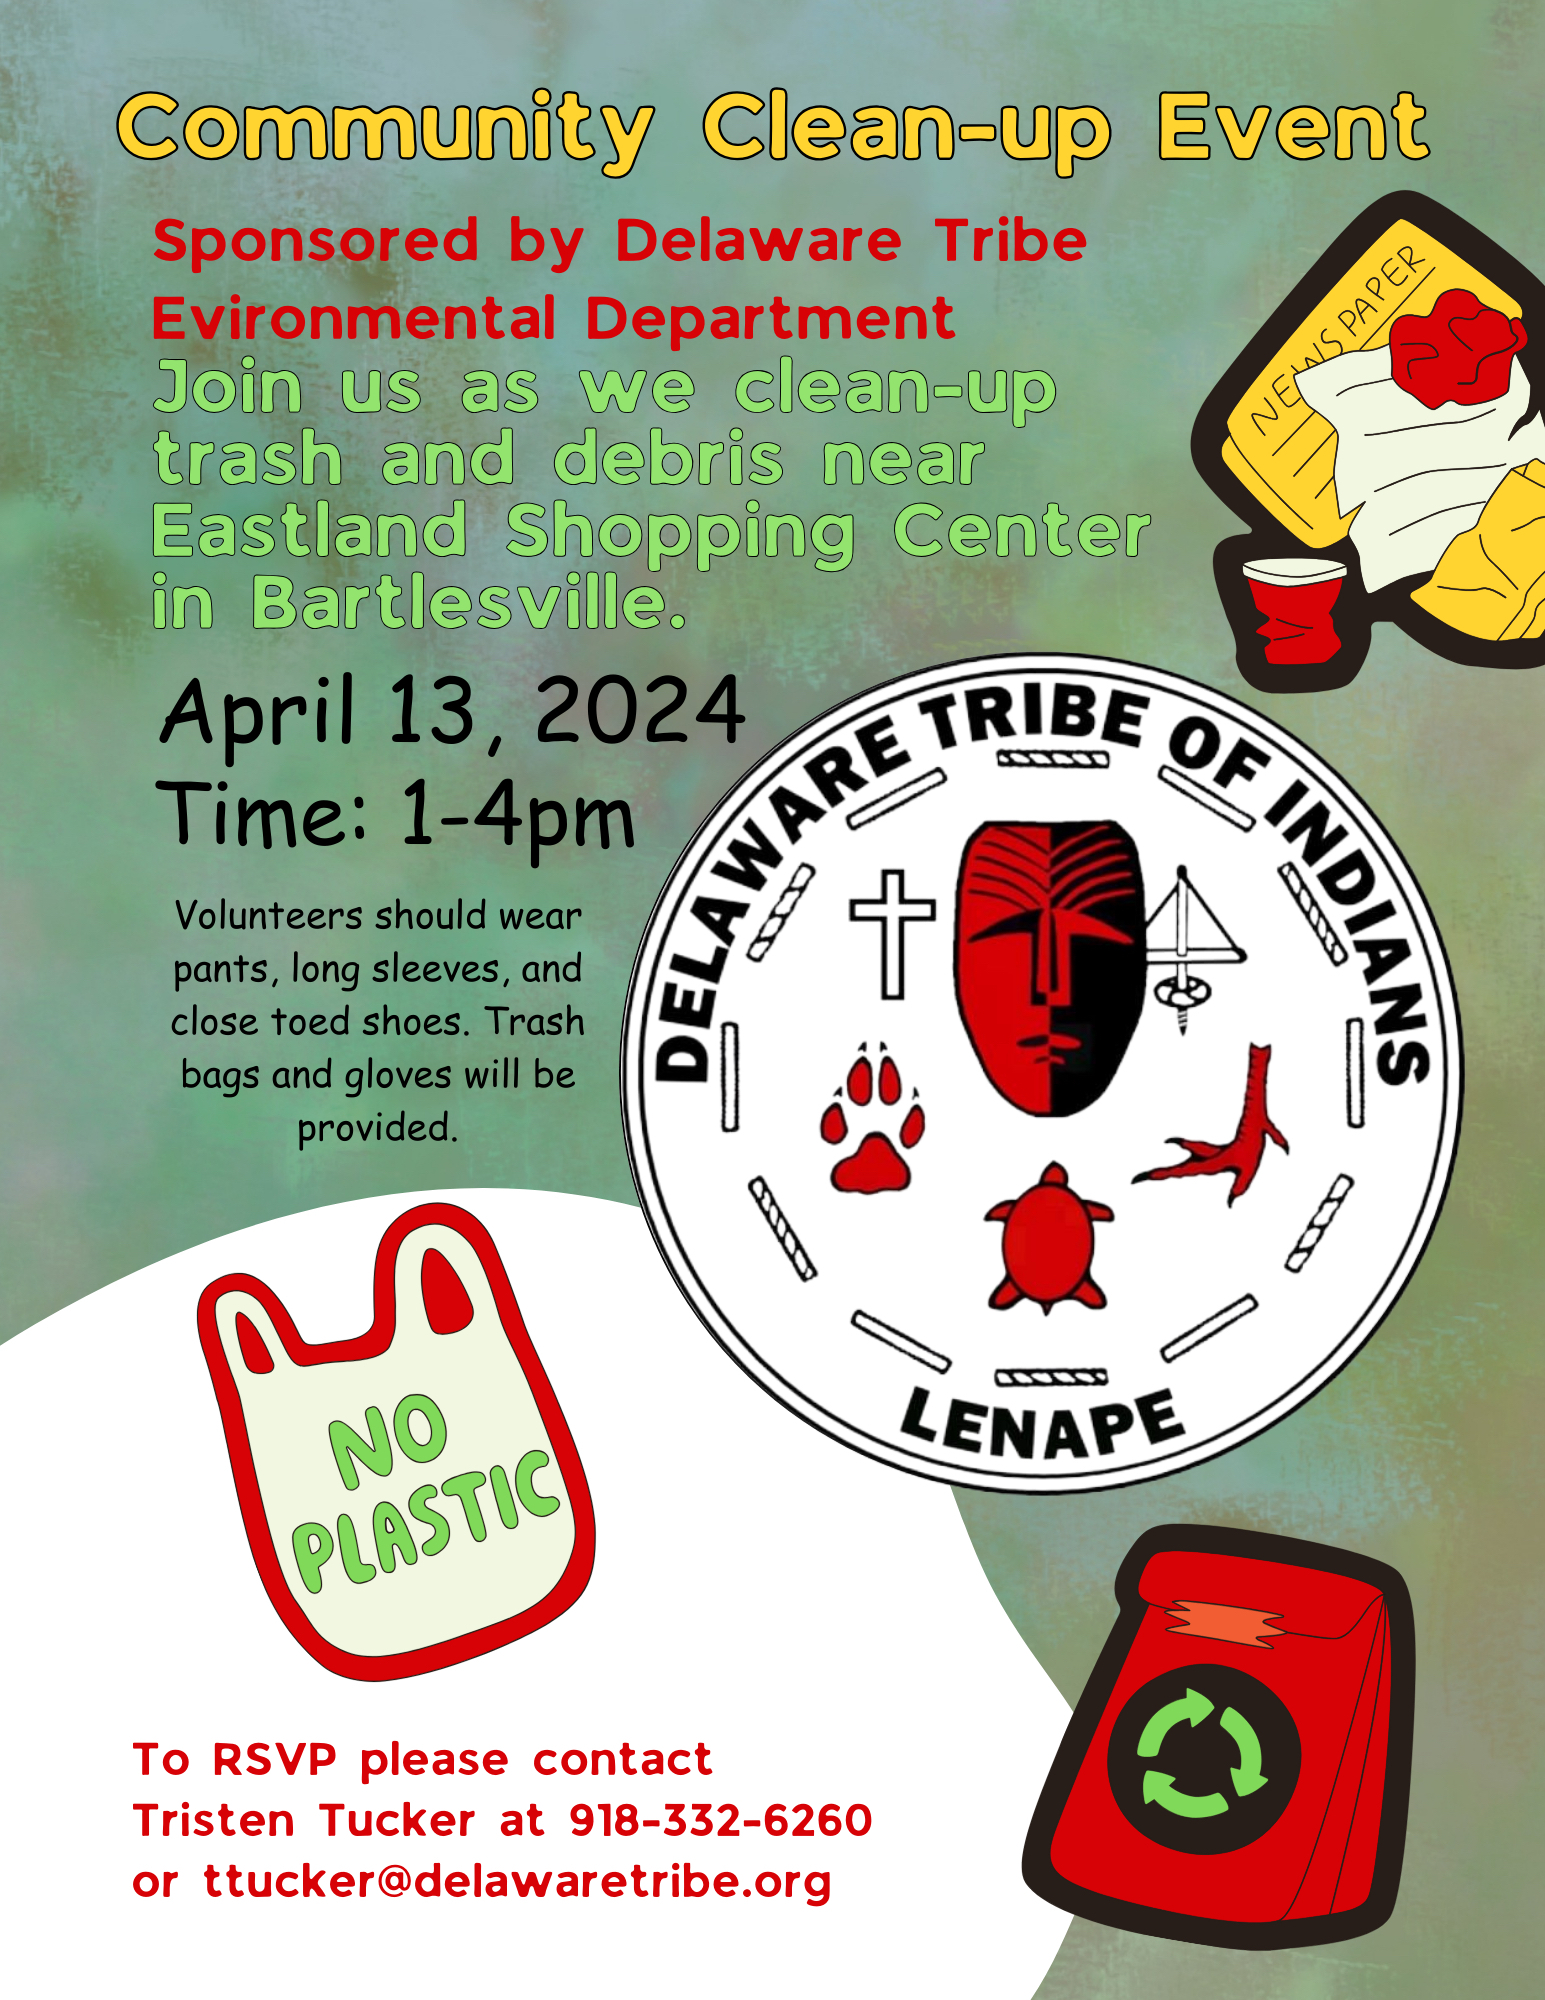 Join us as we clean up trash and debris near Eastland Shopping Center in Bartlesville. Volunteers should wear pants, long sleeves, and close-toed shoes. Trash bags and gloves will be provided. To RSVP please contact Tristen Tucker at (918) 332-6260 or by email at ttucker@delawaretribe.org.